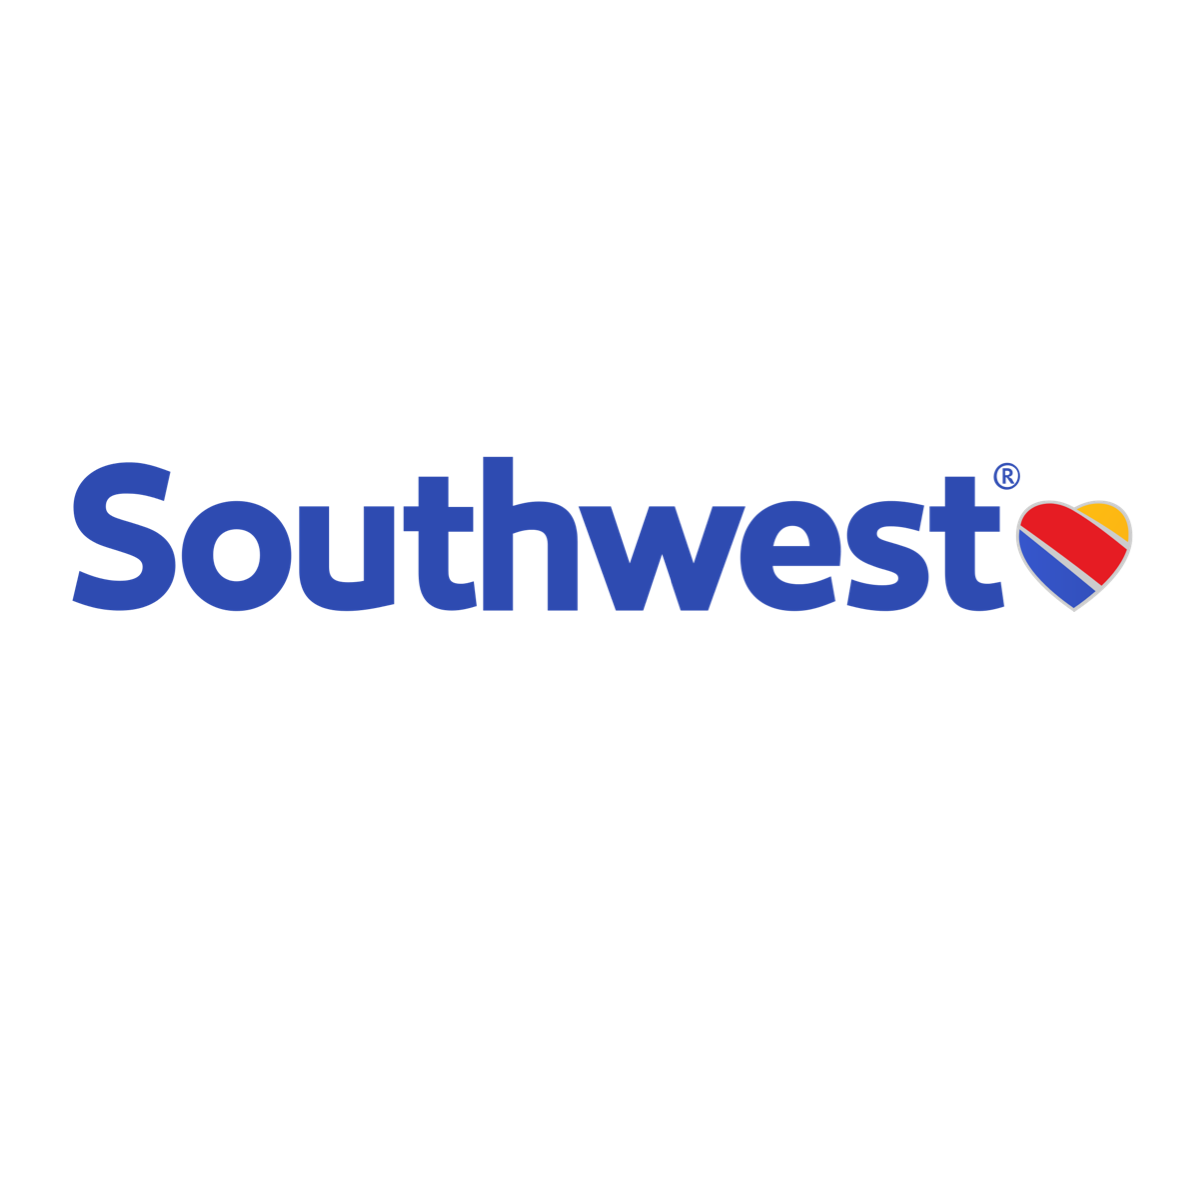 Here's How Much It Will Cost You To Buy Southwest Points